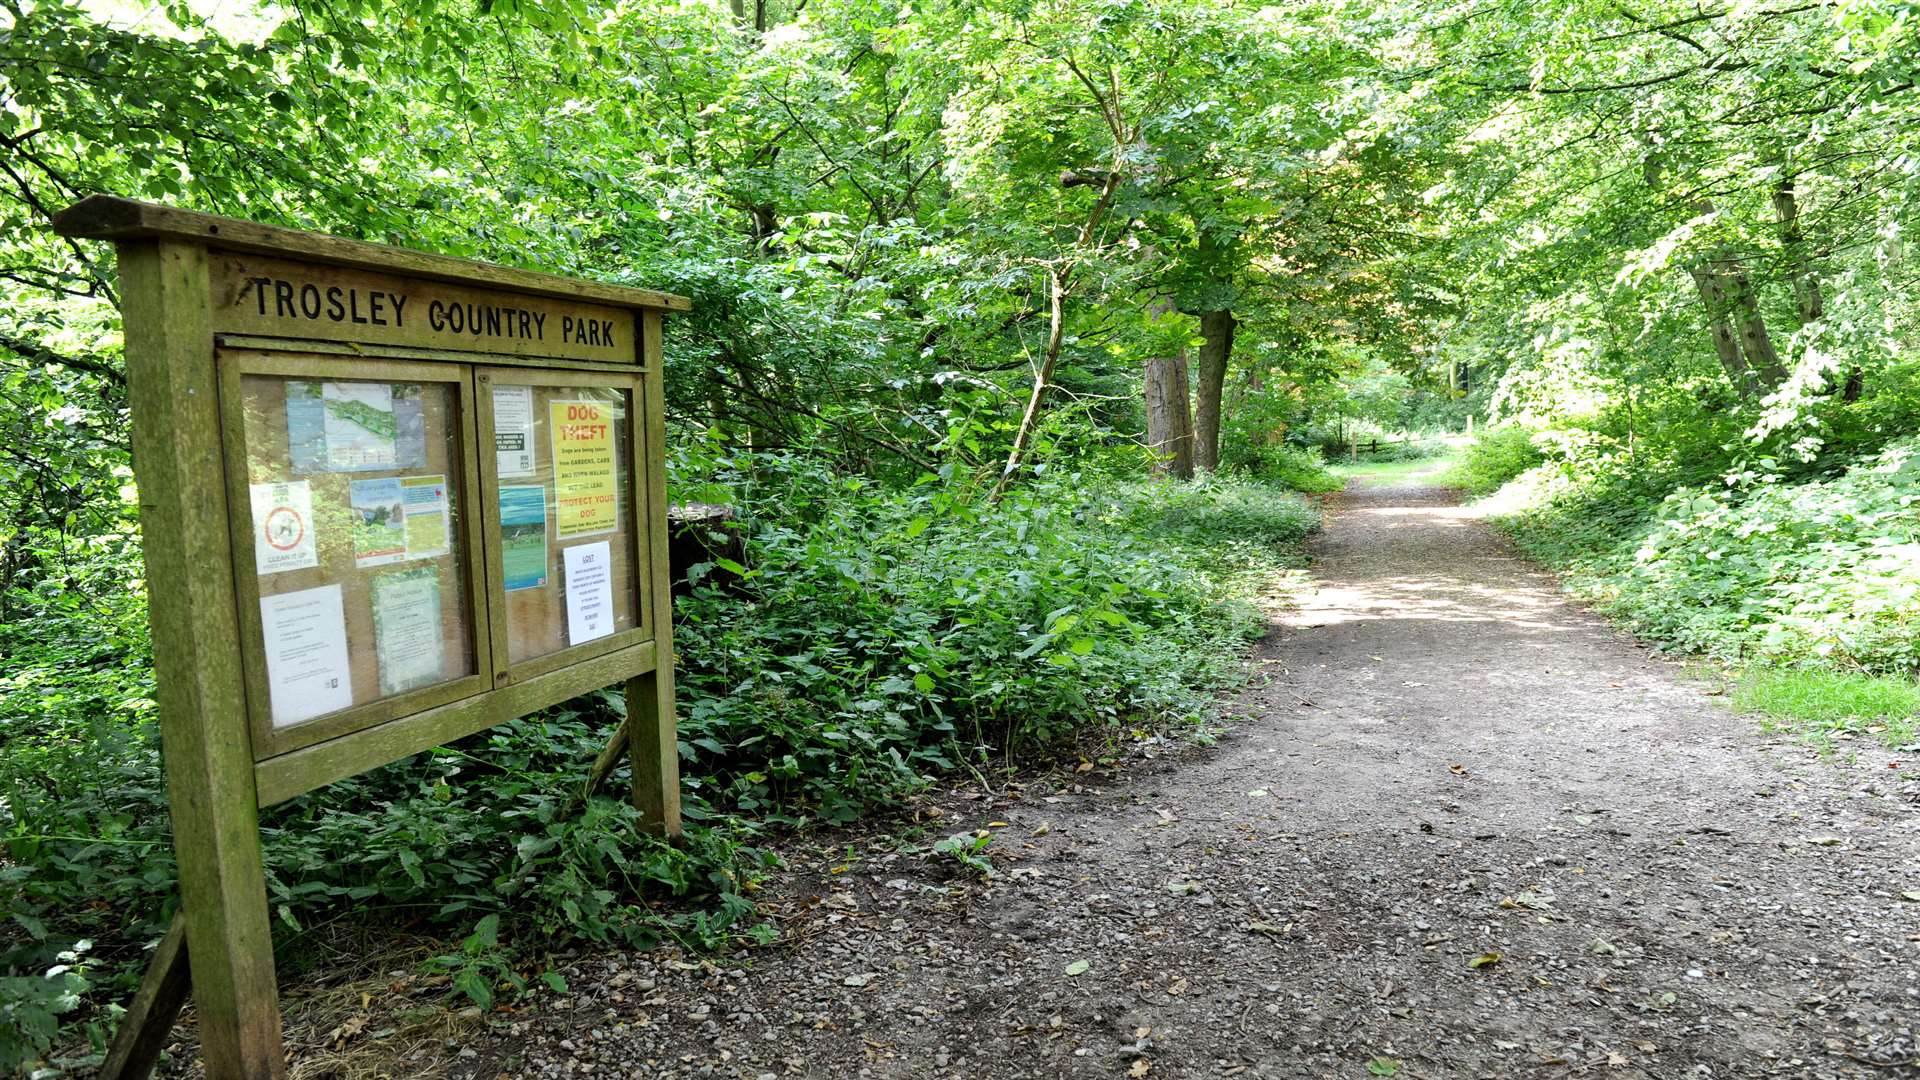 Take time to explore the winding paths at Trosley Country Park